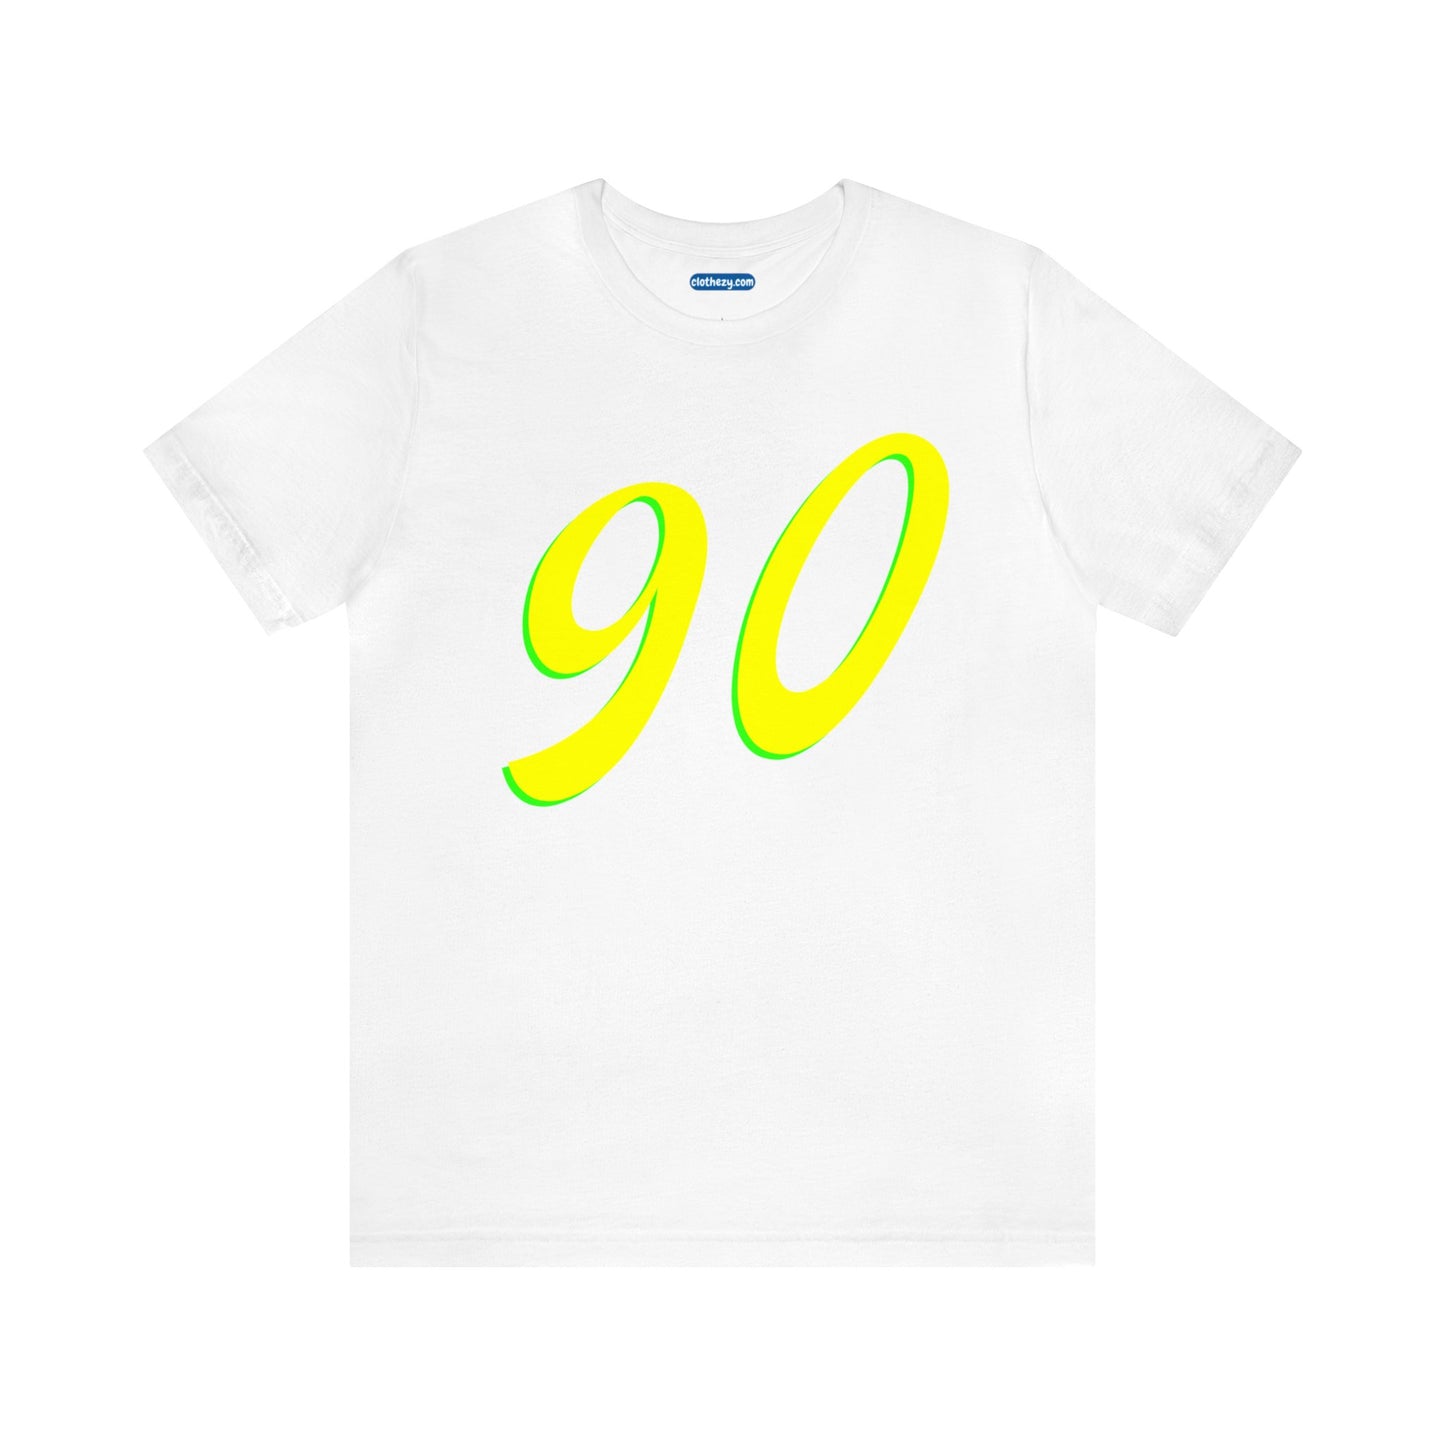 Number 90 Design - Soft Cotton Tee for birthdays and celebrations, Gift for friends and family, Multiple Options by clothezy.com in White Size Small - Buy Now